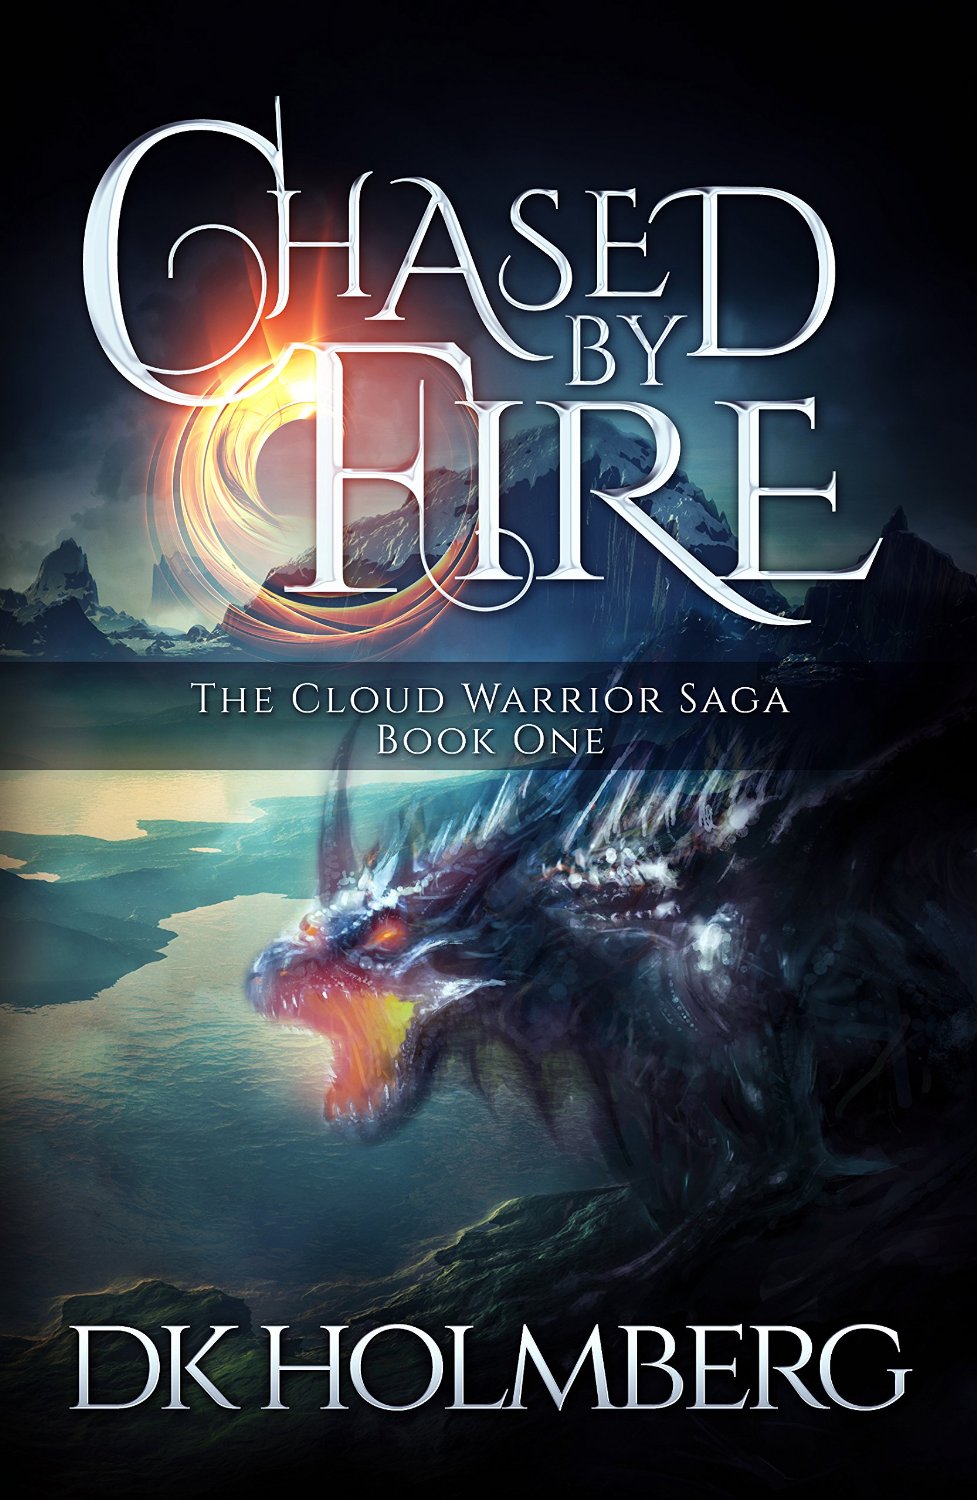 Chased by Fire (The Cloud Warrior Saga Book 1) by D.K. Holmberg